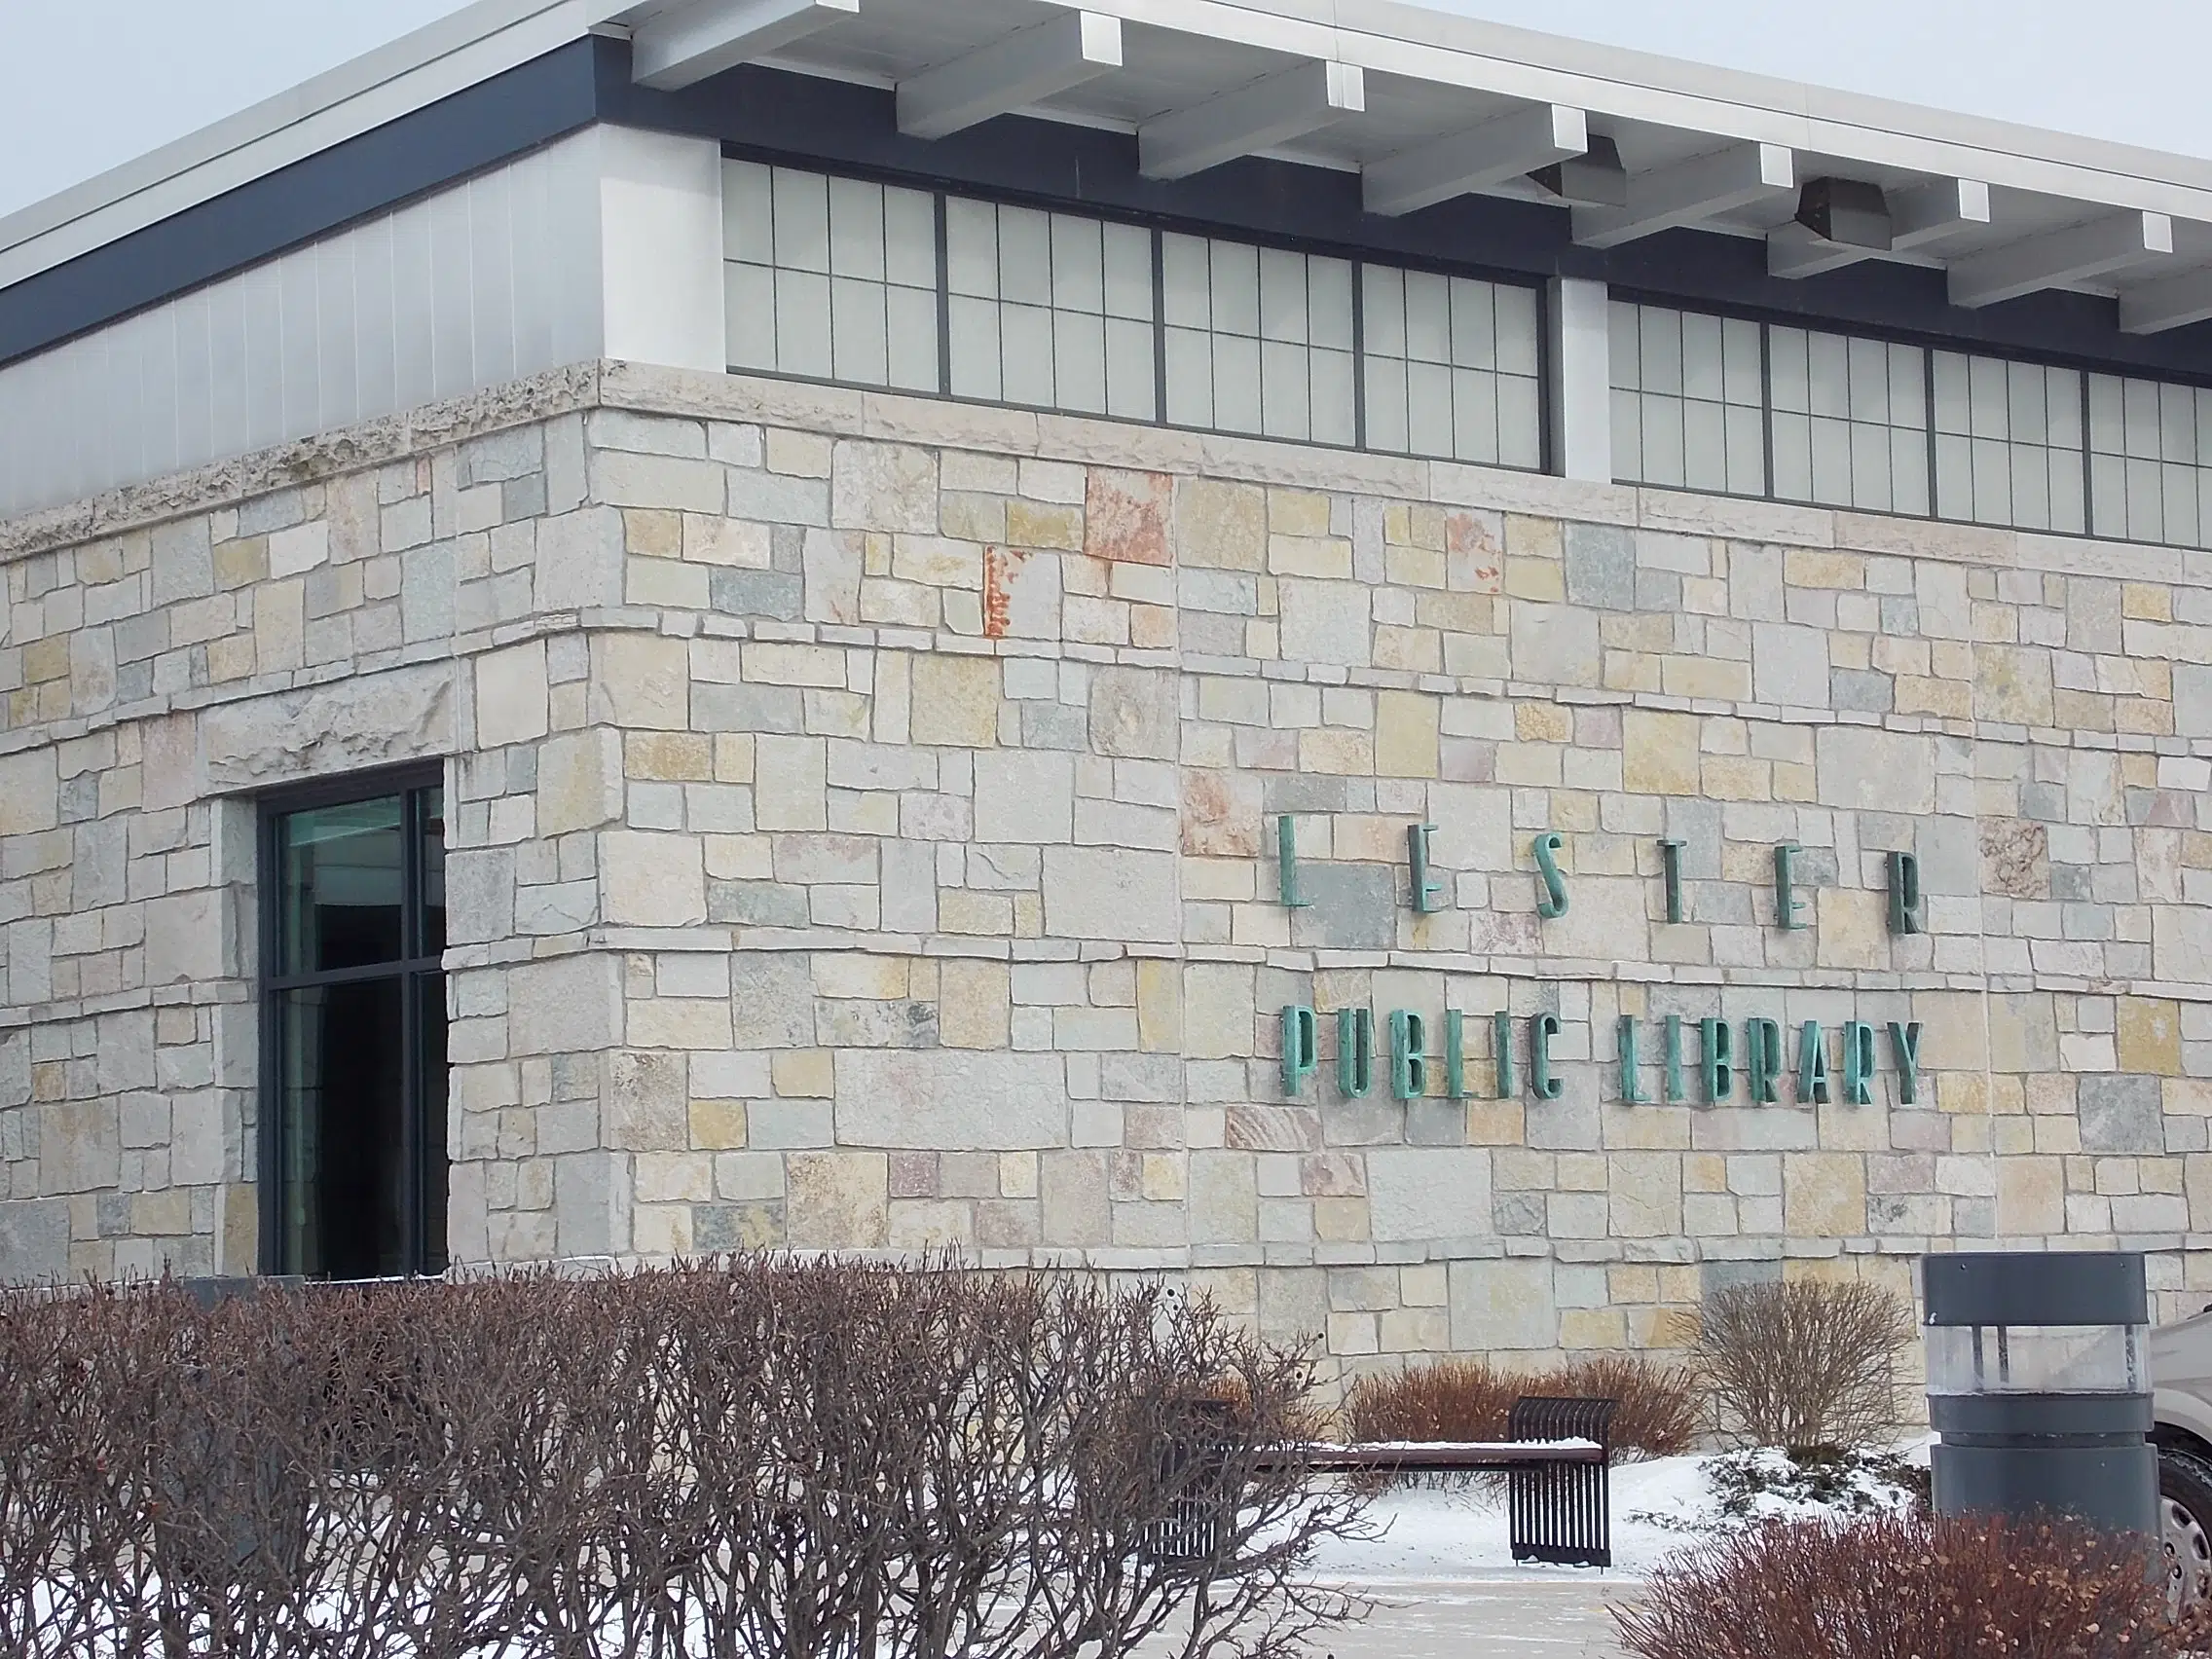 Lester Public Library Offers Teens Several Activities on Friday Evenings